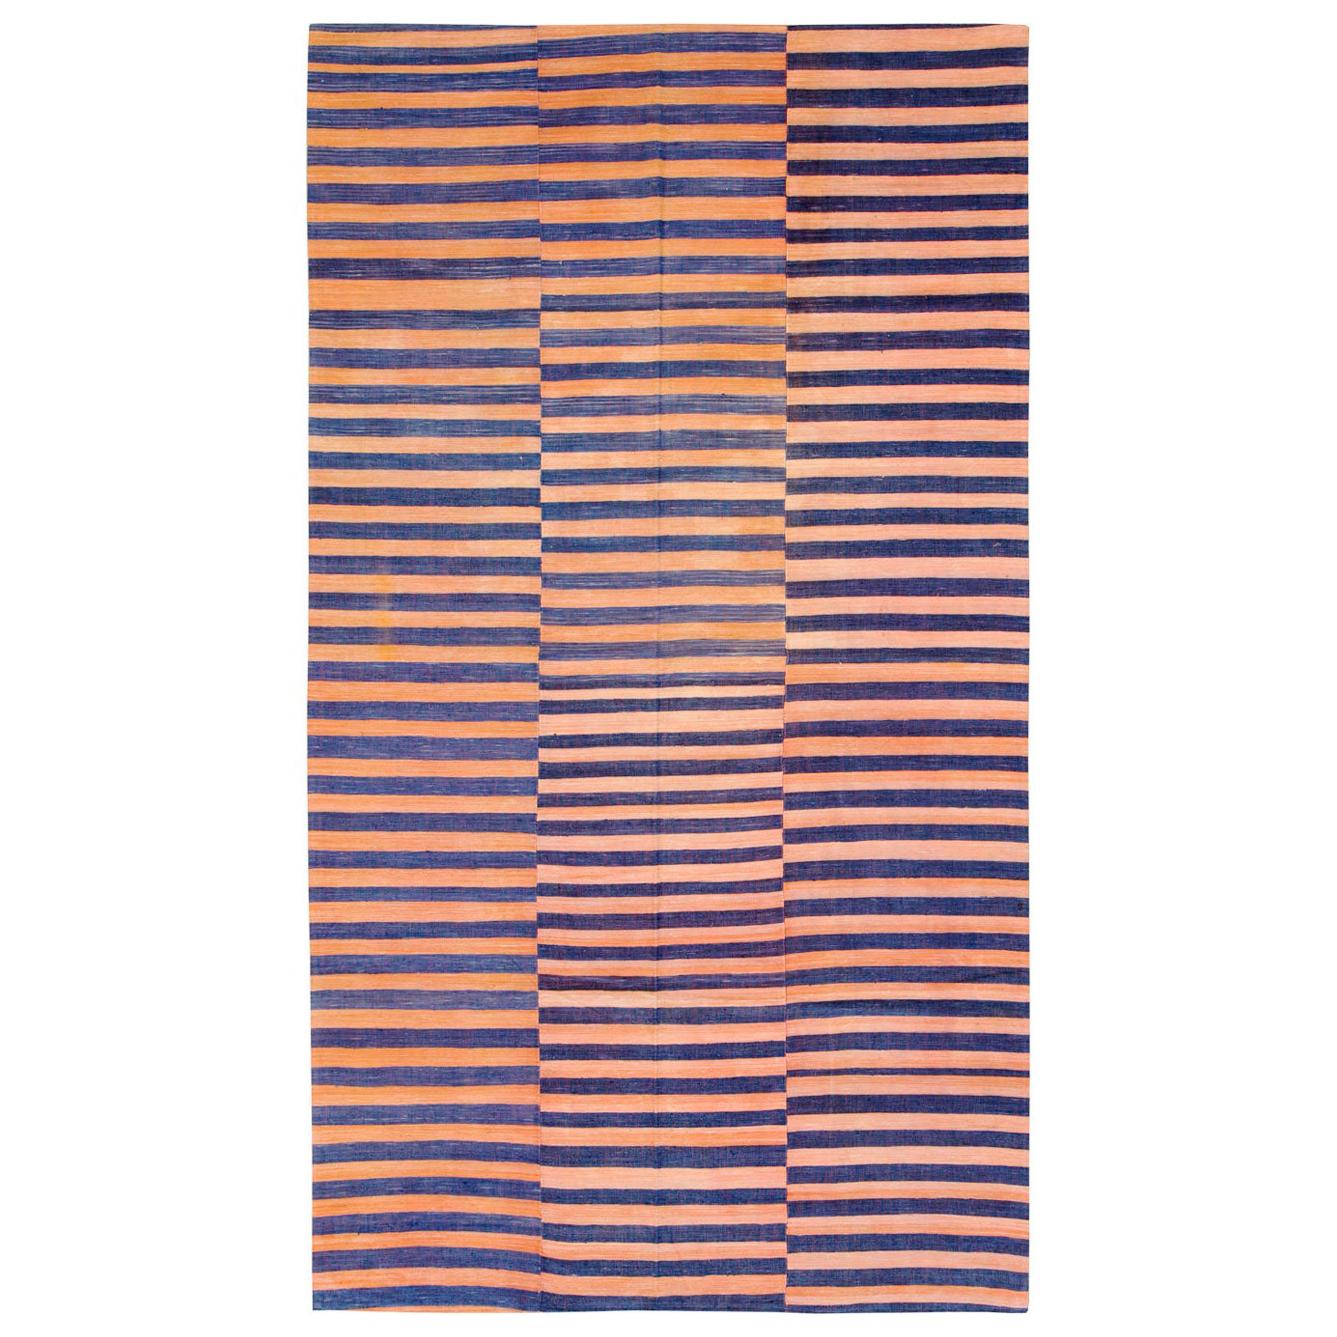 Midcentury Abstract Turkish Handmade Striped Flat-Weave in Persimmon Coral, Blue